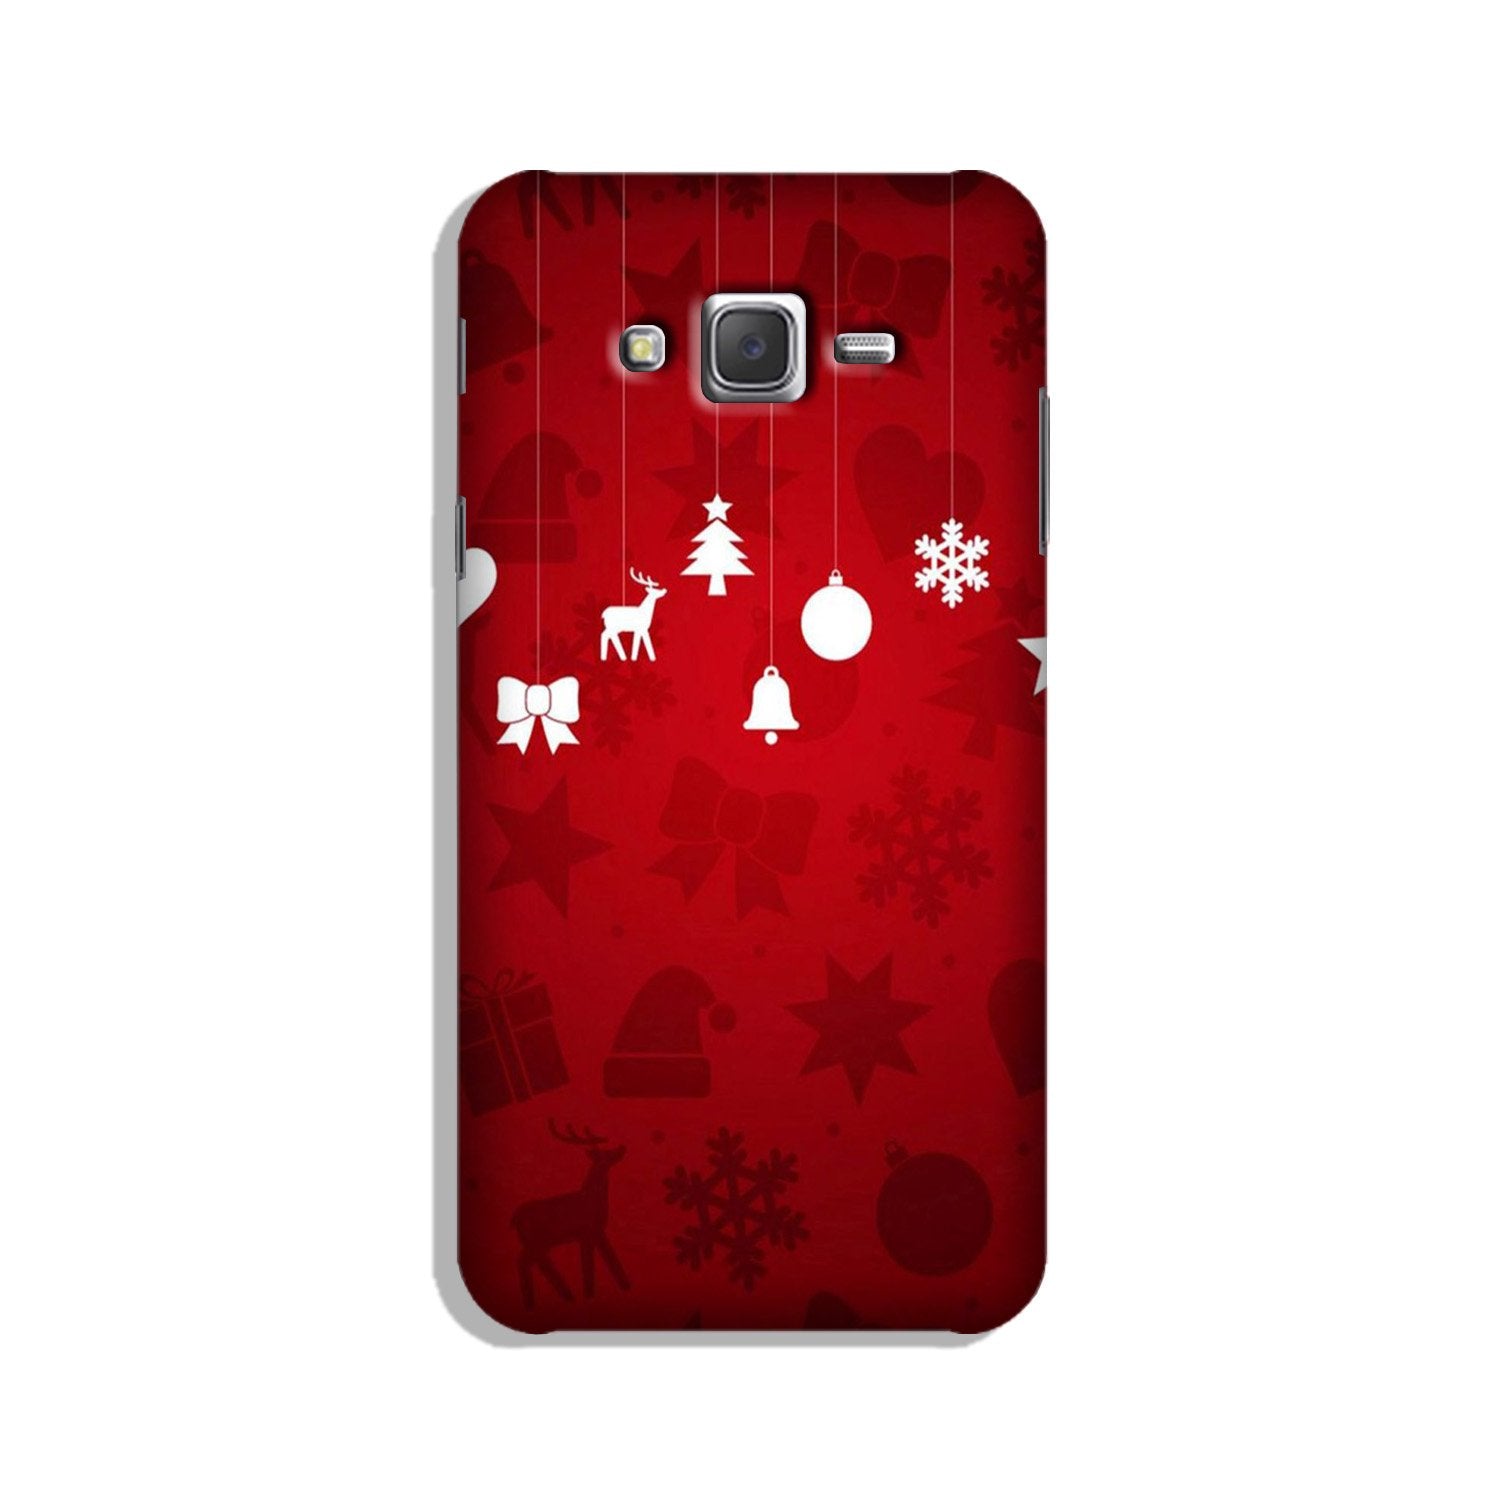 Christmas Case for Galaxy J3 (2015)